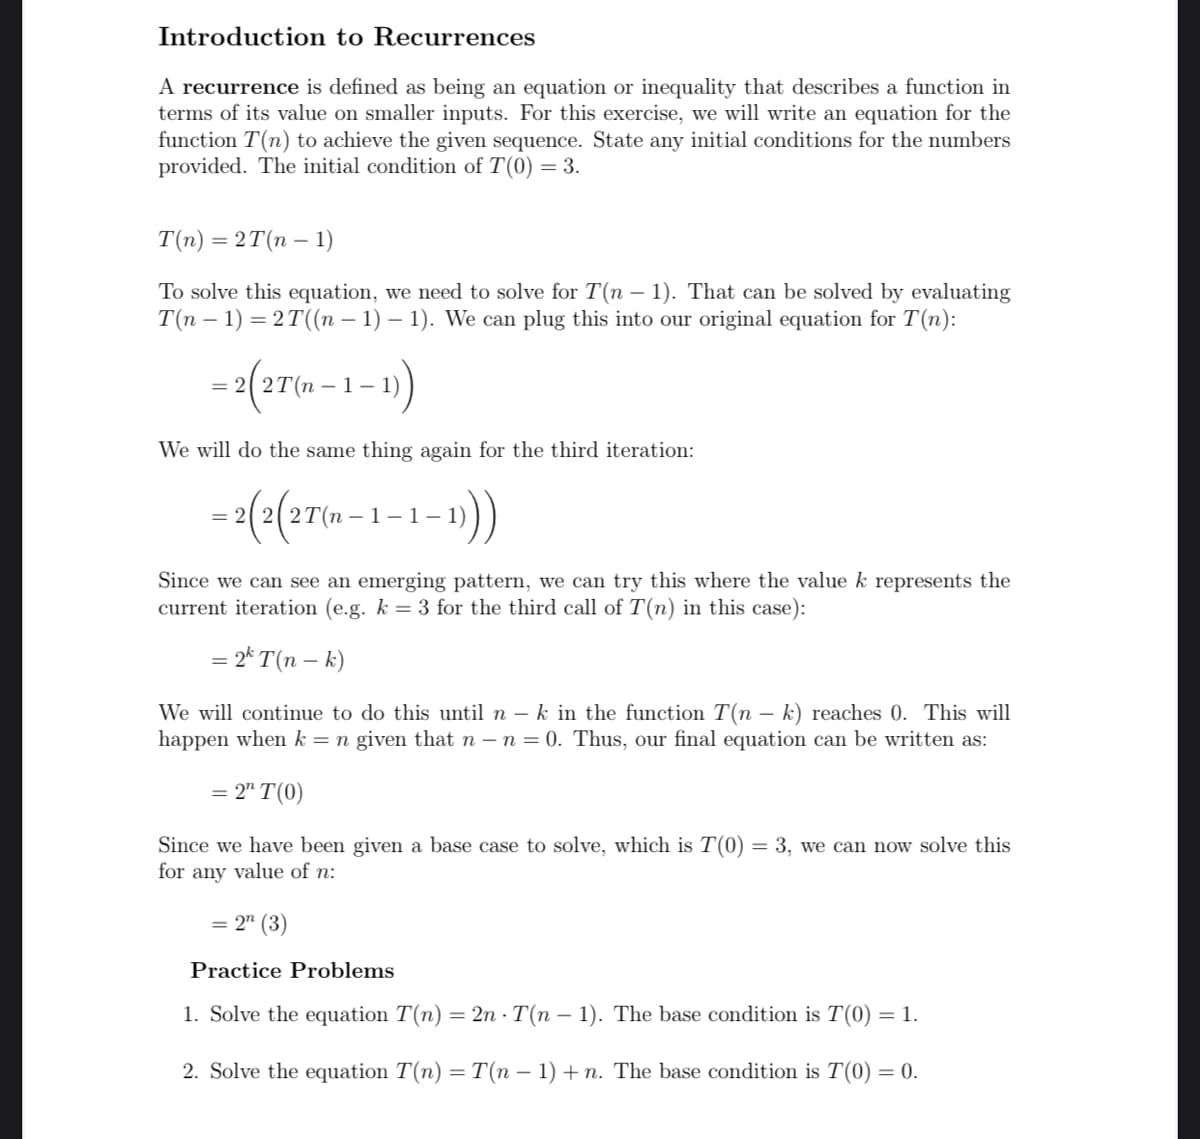 Introduction to Recurrences
A recurrence is defined as being an equation or inequality that describes a function in
terms of its value on smaller inputs. For this exercise, we will write an equation for the
function T(n) to achieve the given sequence. State any initial conditions for the numbers
provided. The initial condition of T(0) = 3.
T(n) = 2T(n − 1)
To solve this equation, we need to solve for T(n − 1). That can be solved by evaluating
T(n − 1) = 2T ((n − 1) − 1). We can plug this into our original equation for T(n):
= 2(2T(n-1-1))
We will do the same thing again for the third iteration:
= 2(2(2T(n-1-1. -1)))
Since we can see an emerging pattern, we can try this where the value k represents the
current iteration (e.g. k = 3 for the third call of T(n) in this case):
= 2k T(n - k)
We will continue to do this until n - k in the function T(n - k) reaches 0. This will
happen when k = n given that n - n = 0. Thus, our final equation can be written as:
= 2" T(0)
Since we have been given a base case to solve, which is T(0) = 3, we can now solve this
for any value of n:
= 2n (3)
Practice Problems
1. Solve the equation T(n) = 2n - T(n − 1). The base condition is T(0) = 1.
2. Solve the equation T(n) = T(n − 1) + n. The base condition is T(0) = 0.